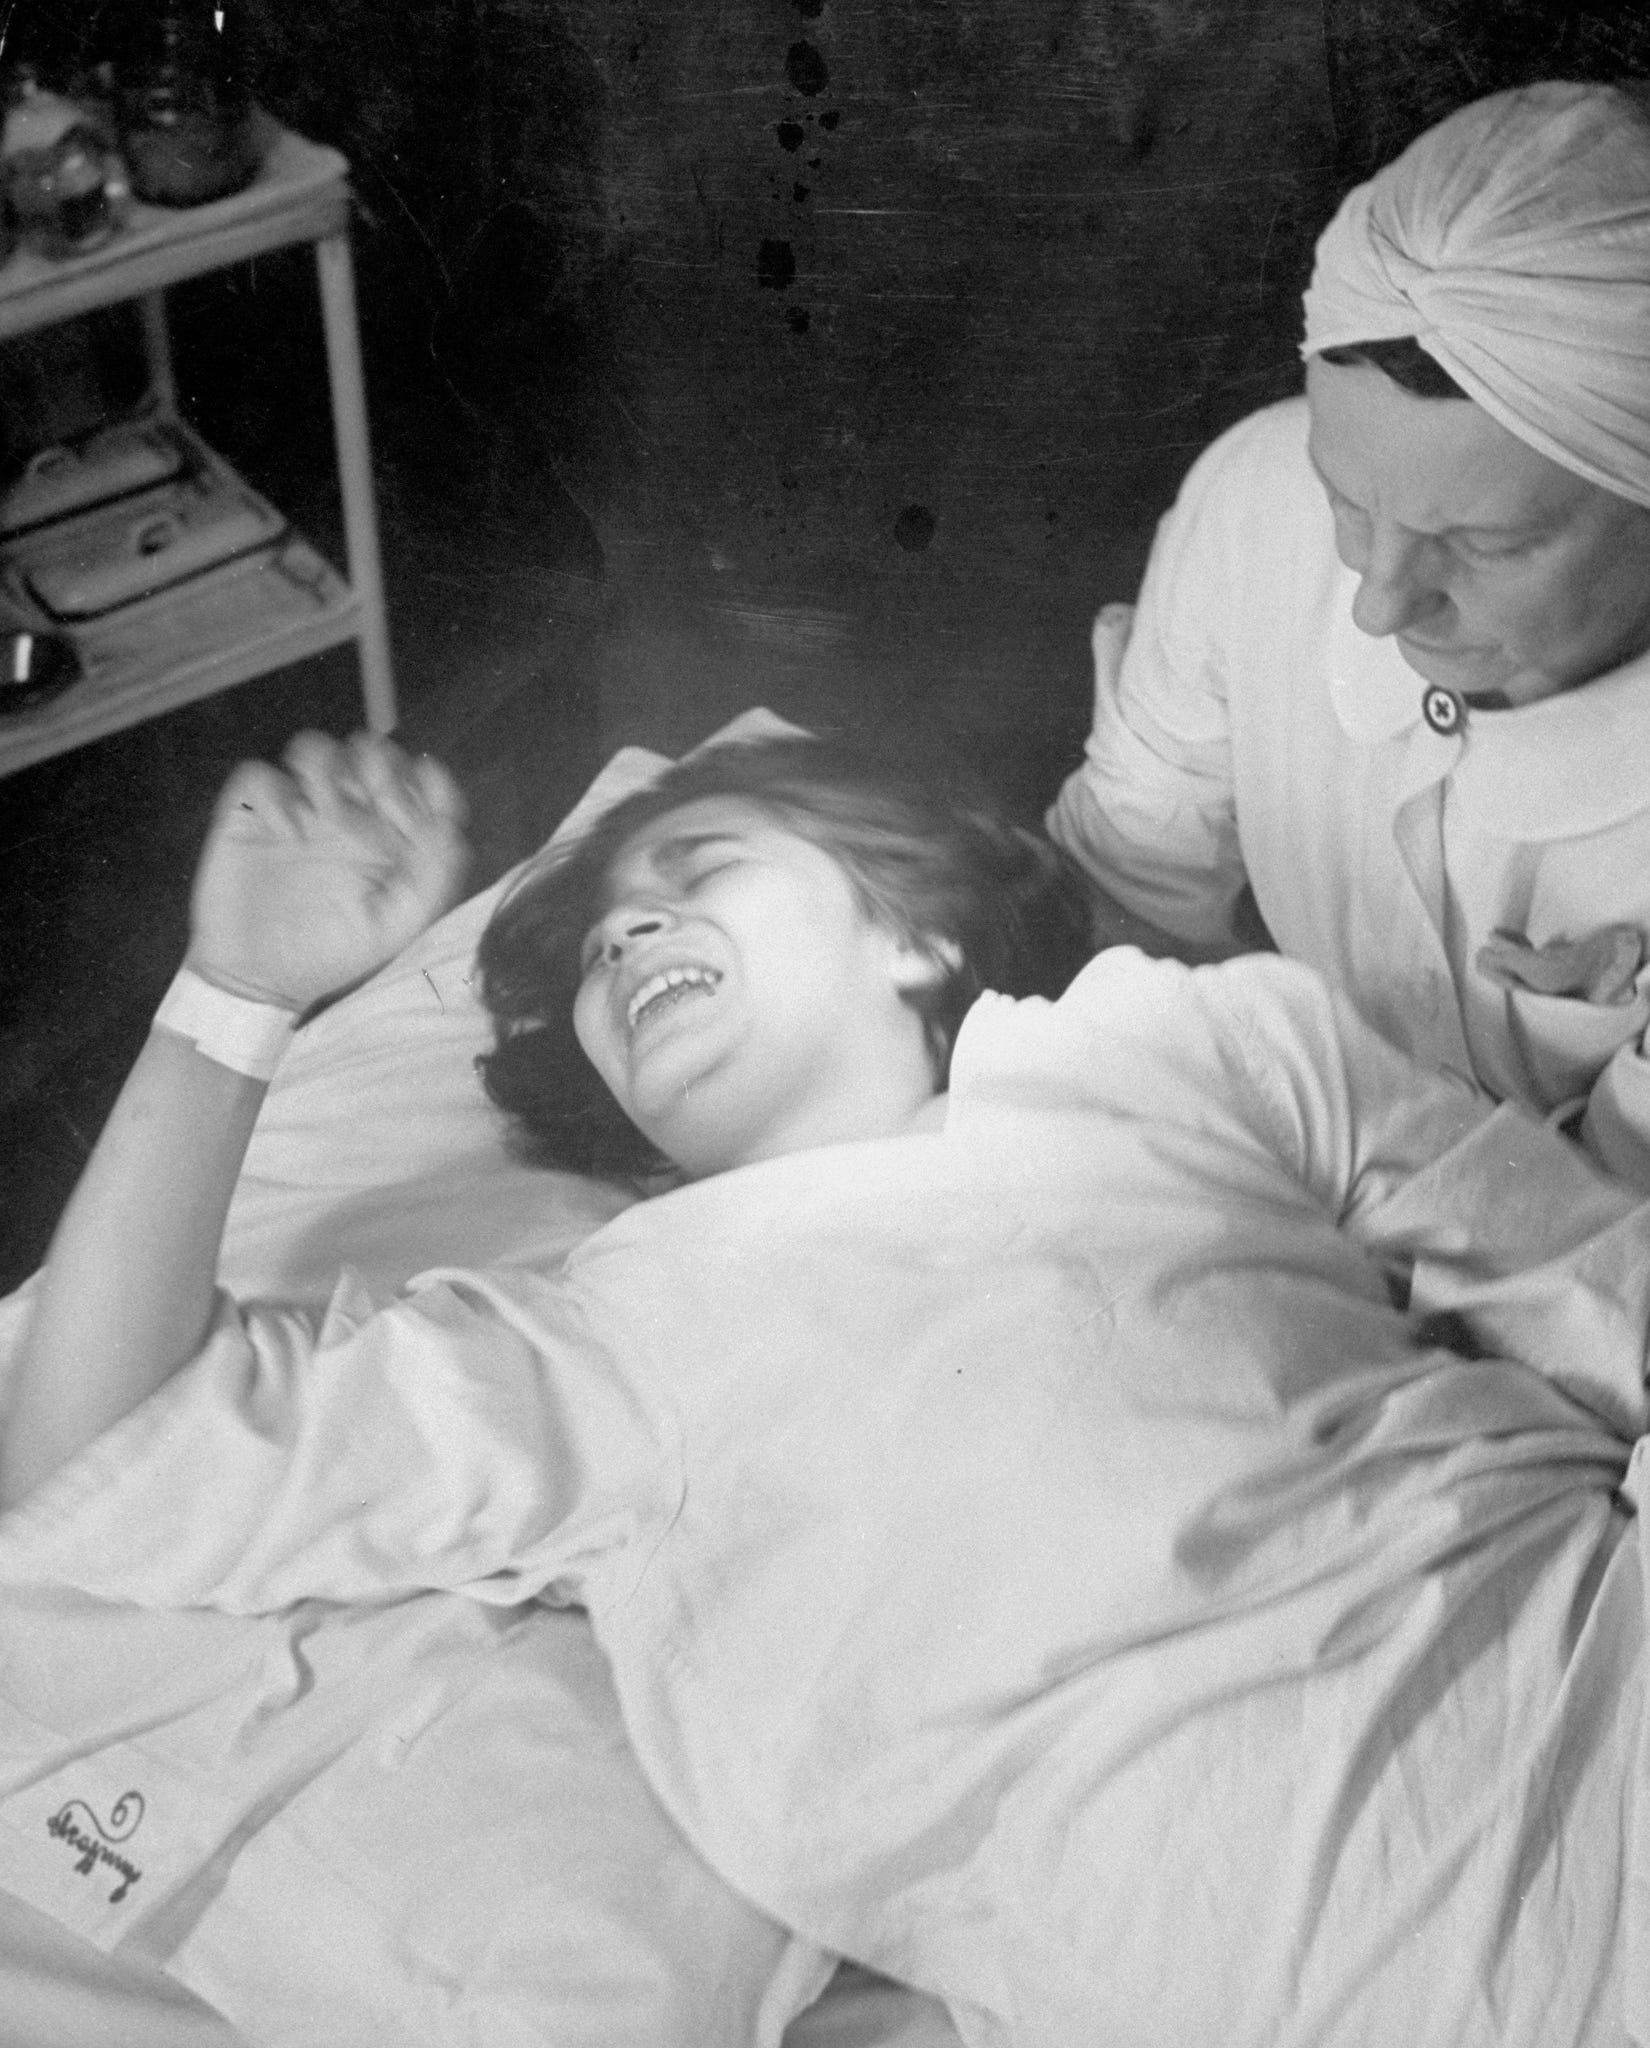 Restraints, hallucinations, and forgotten pain were the norm on midcentury  maternity wards | by Nina Renata Aron | Timeline